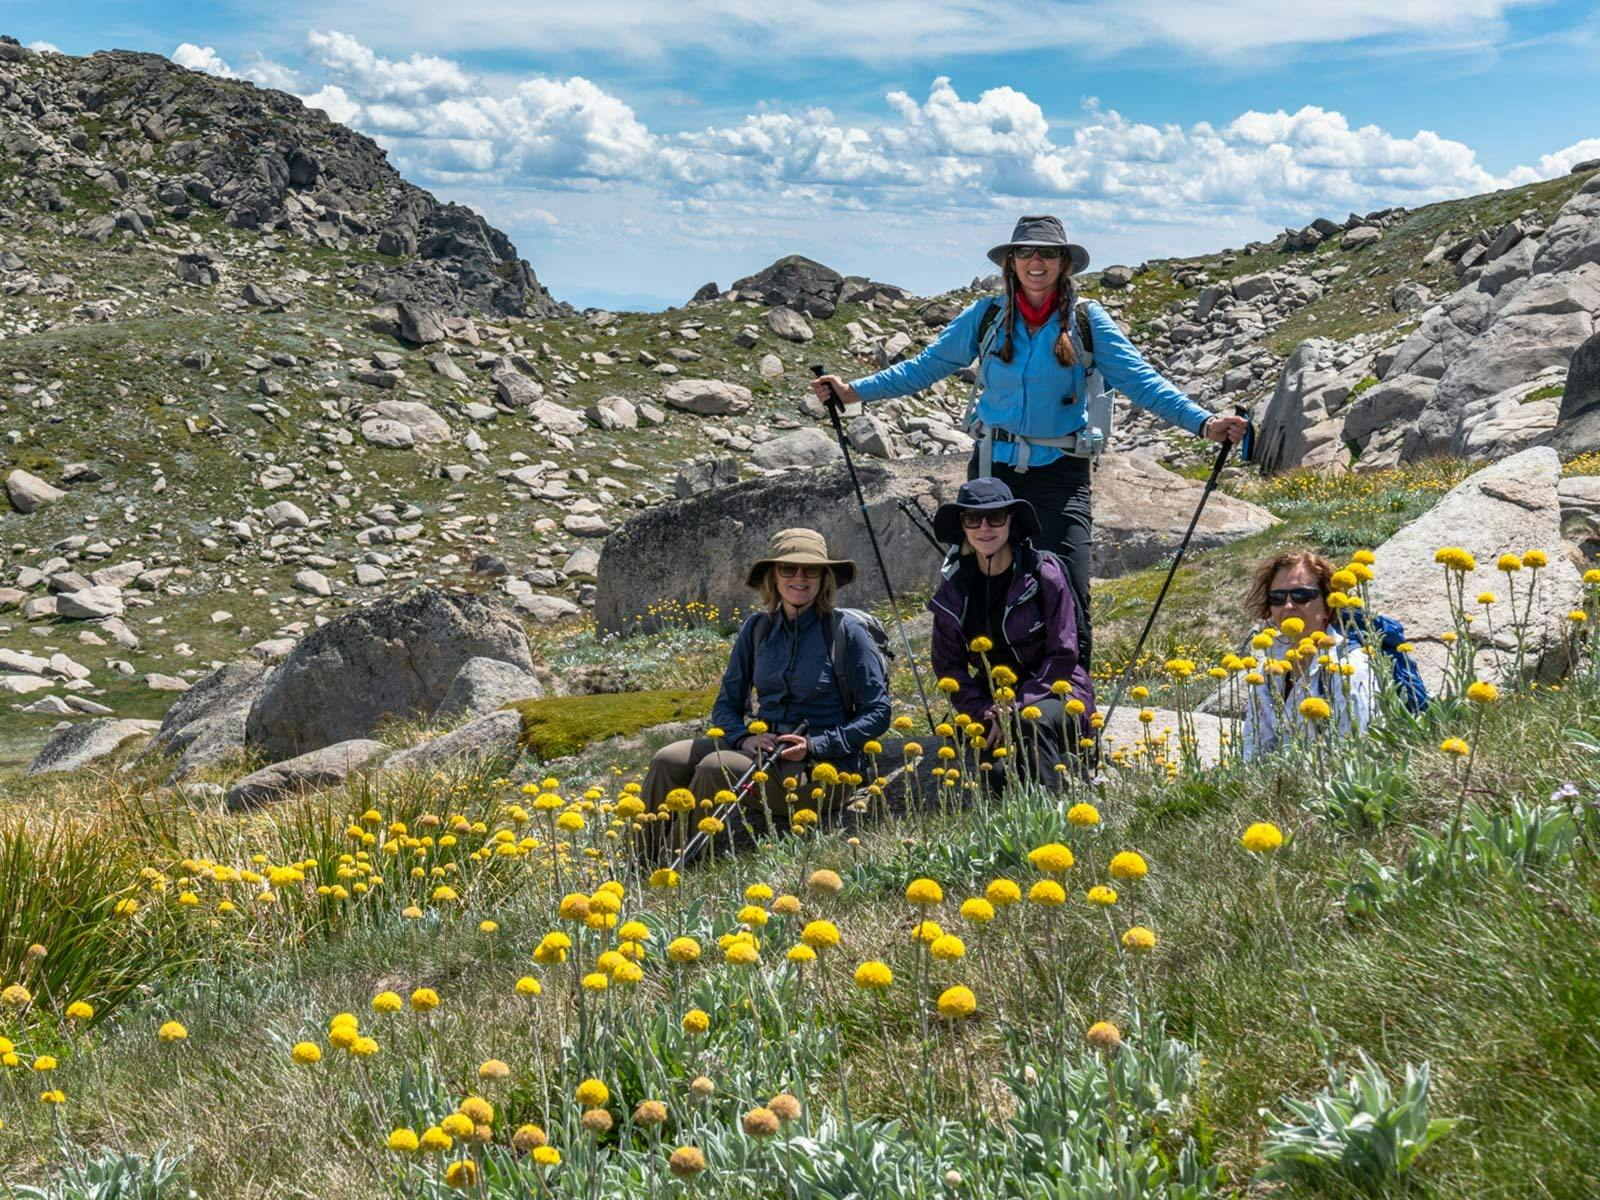 Hiking in the wildflowers of the Australian Alps